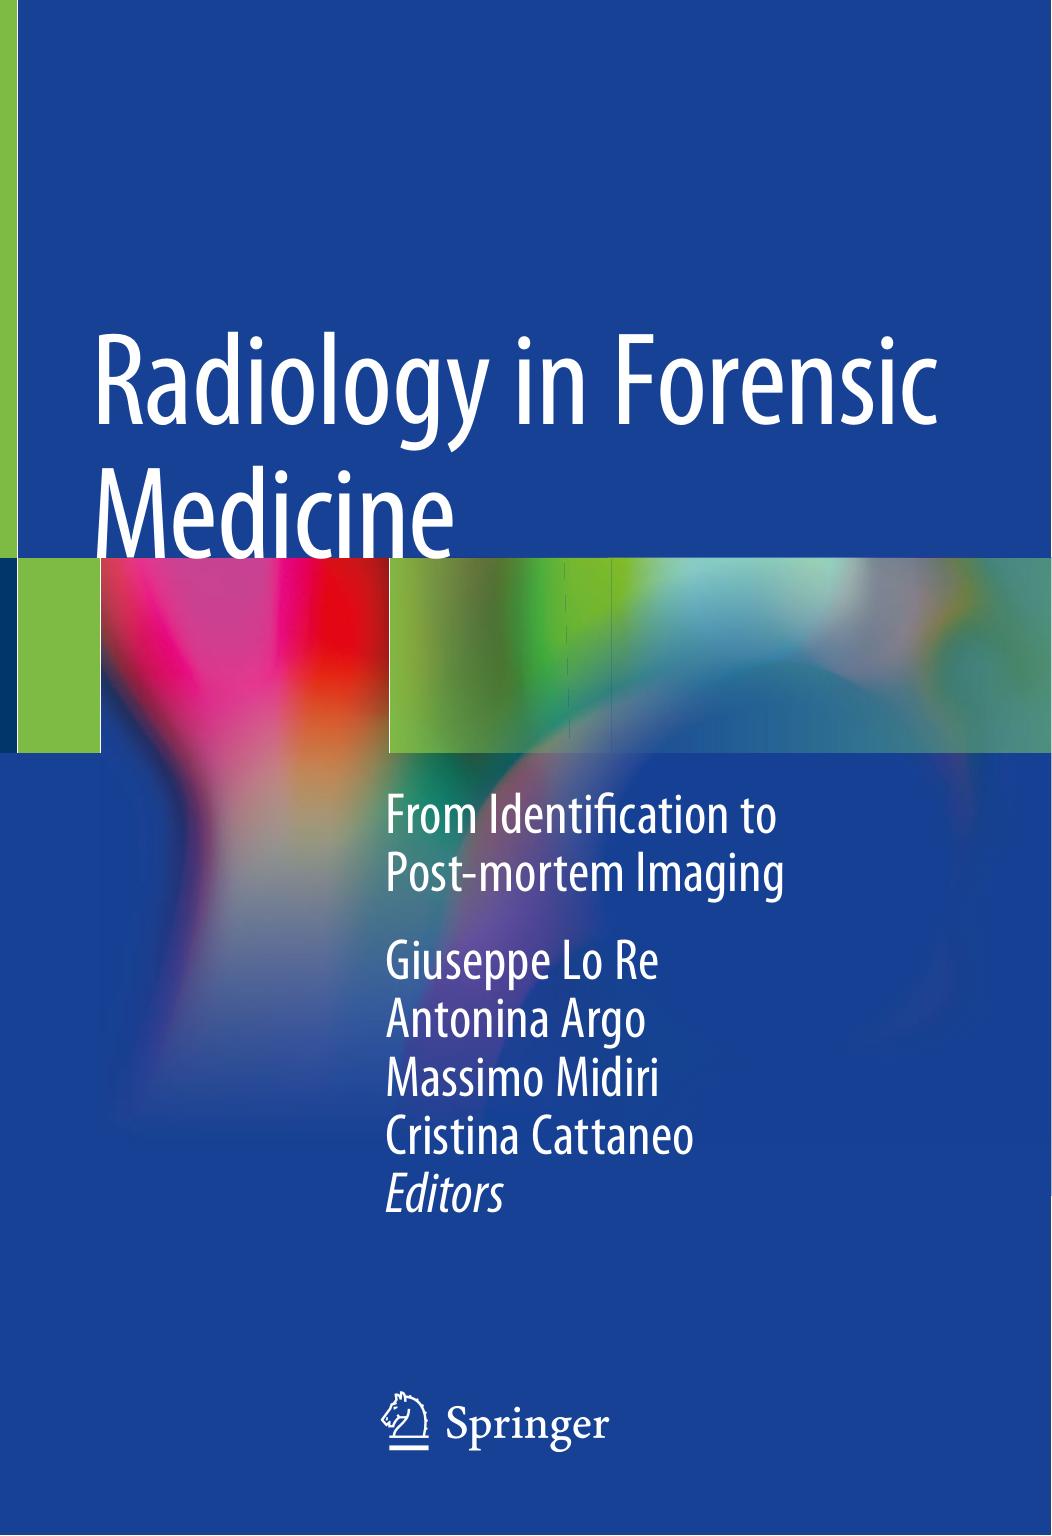 Radiology in Forensic Medicine  From Identification to Post-mortem Imaging 2020